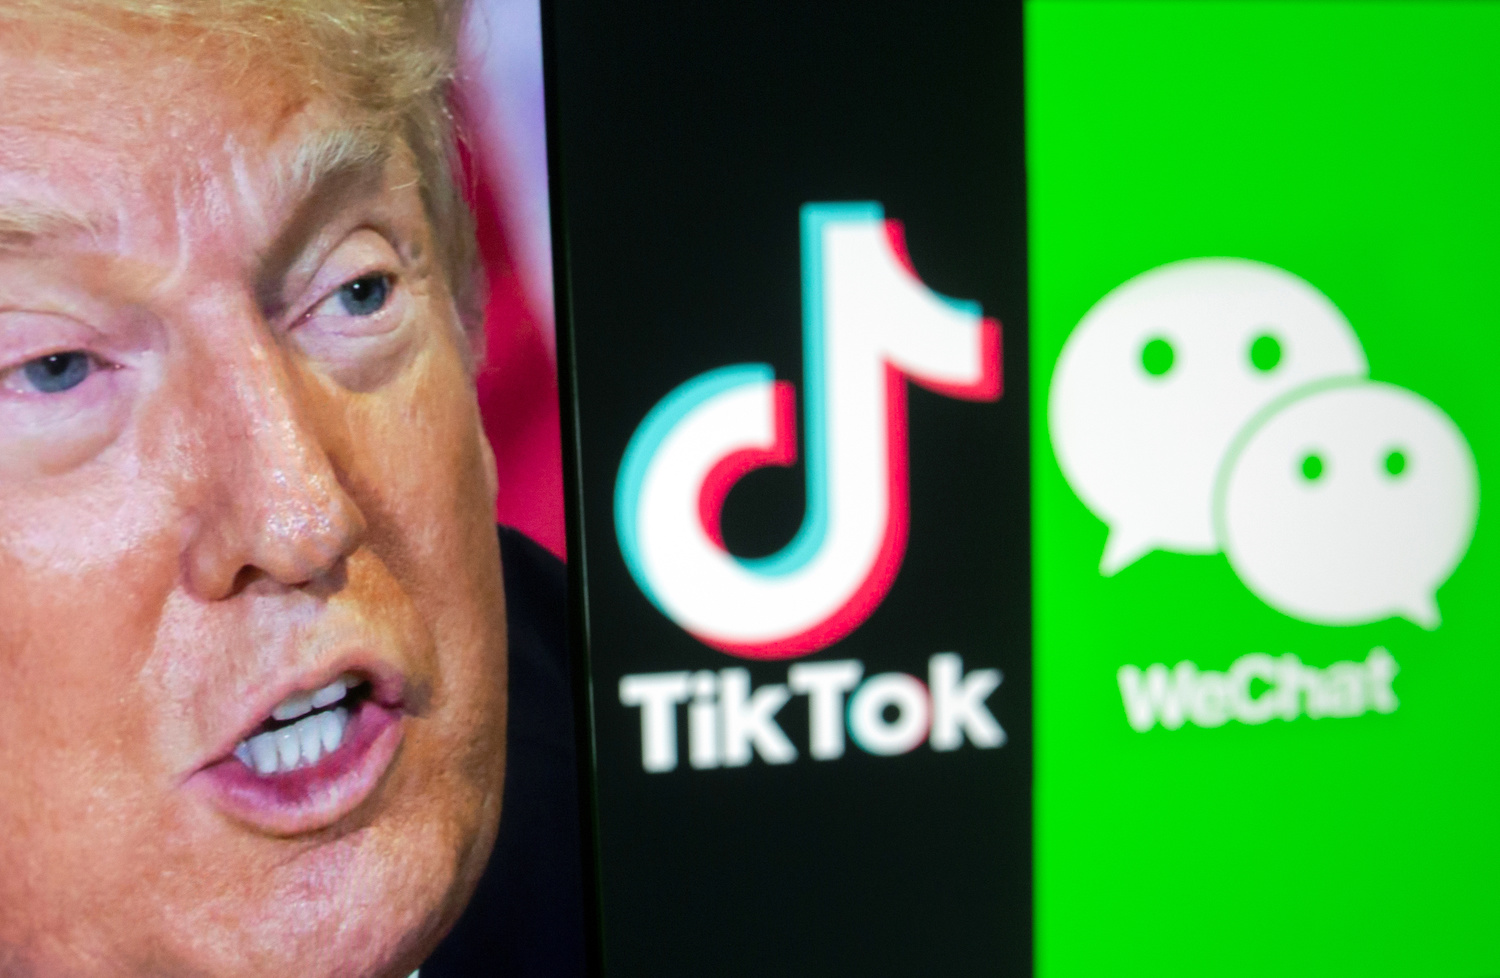 TikTok announces deal to keep US user data on Oracle servers: While the Biden administration has not pursued Chinese apps with the same vigour as Trump, the US is still considering new rules.